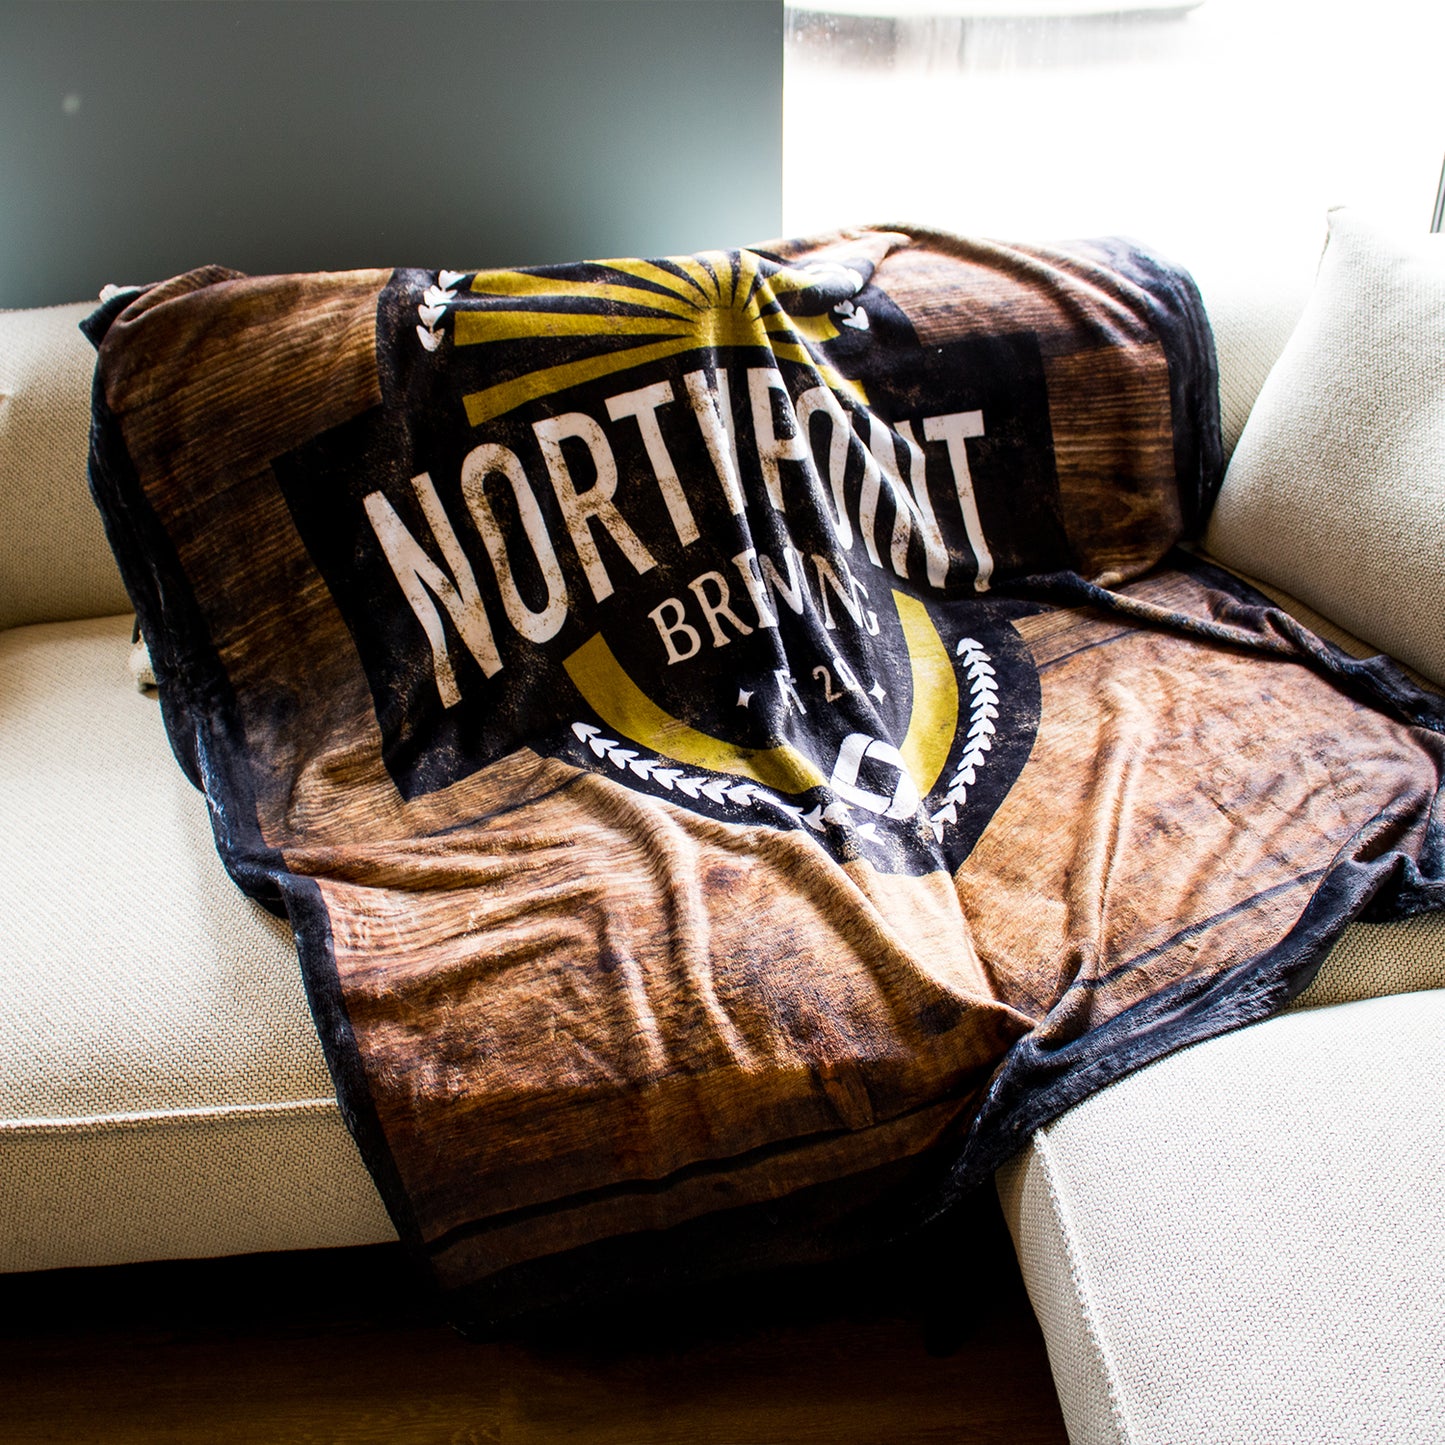 NorthPoint Brewing Plush Throw